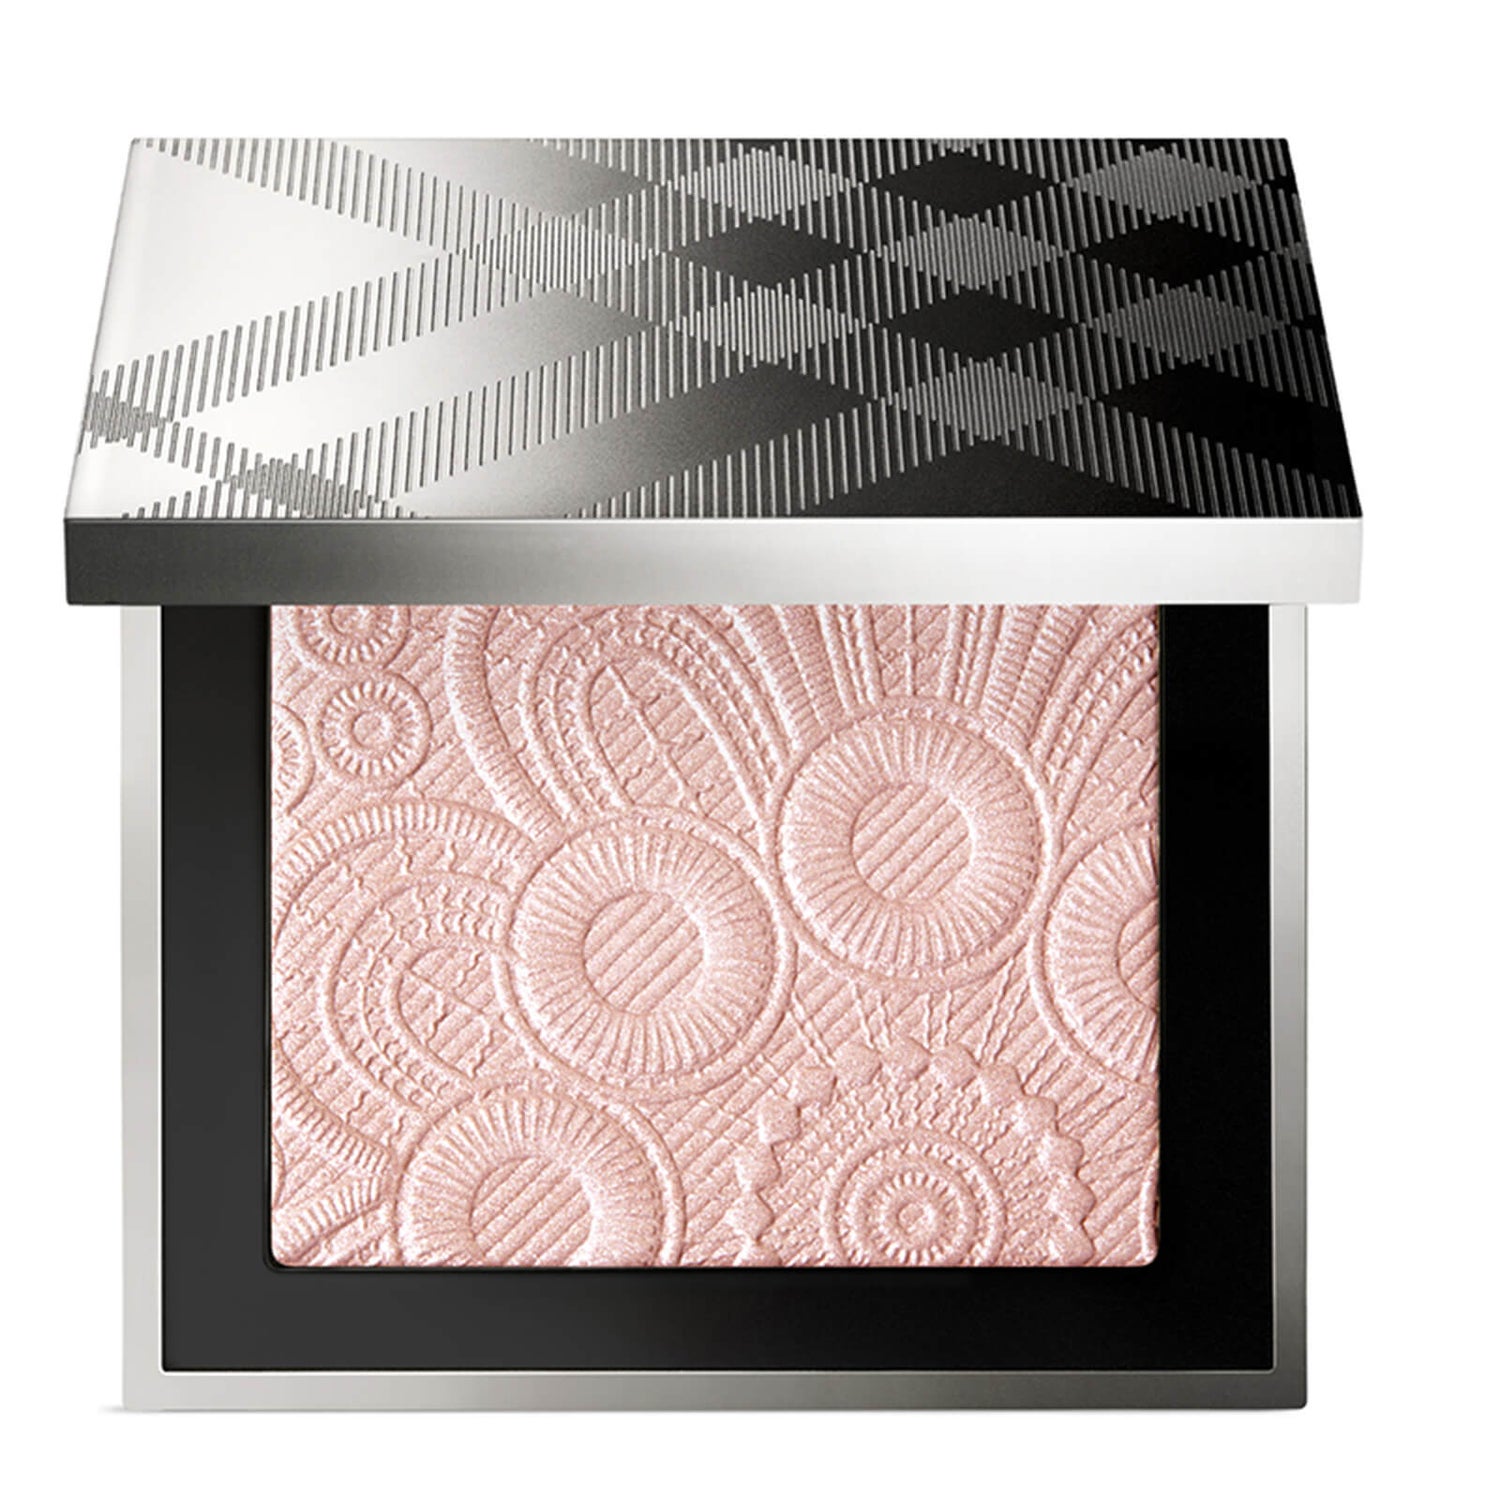 Burberry Face Fresh Glow Highlighter - Pink Pearl 03